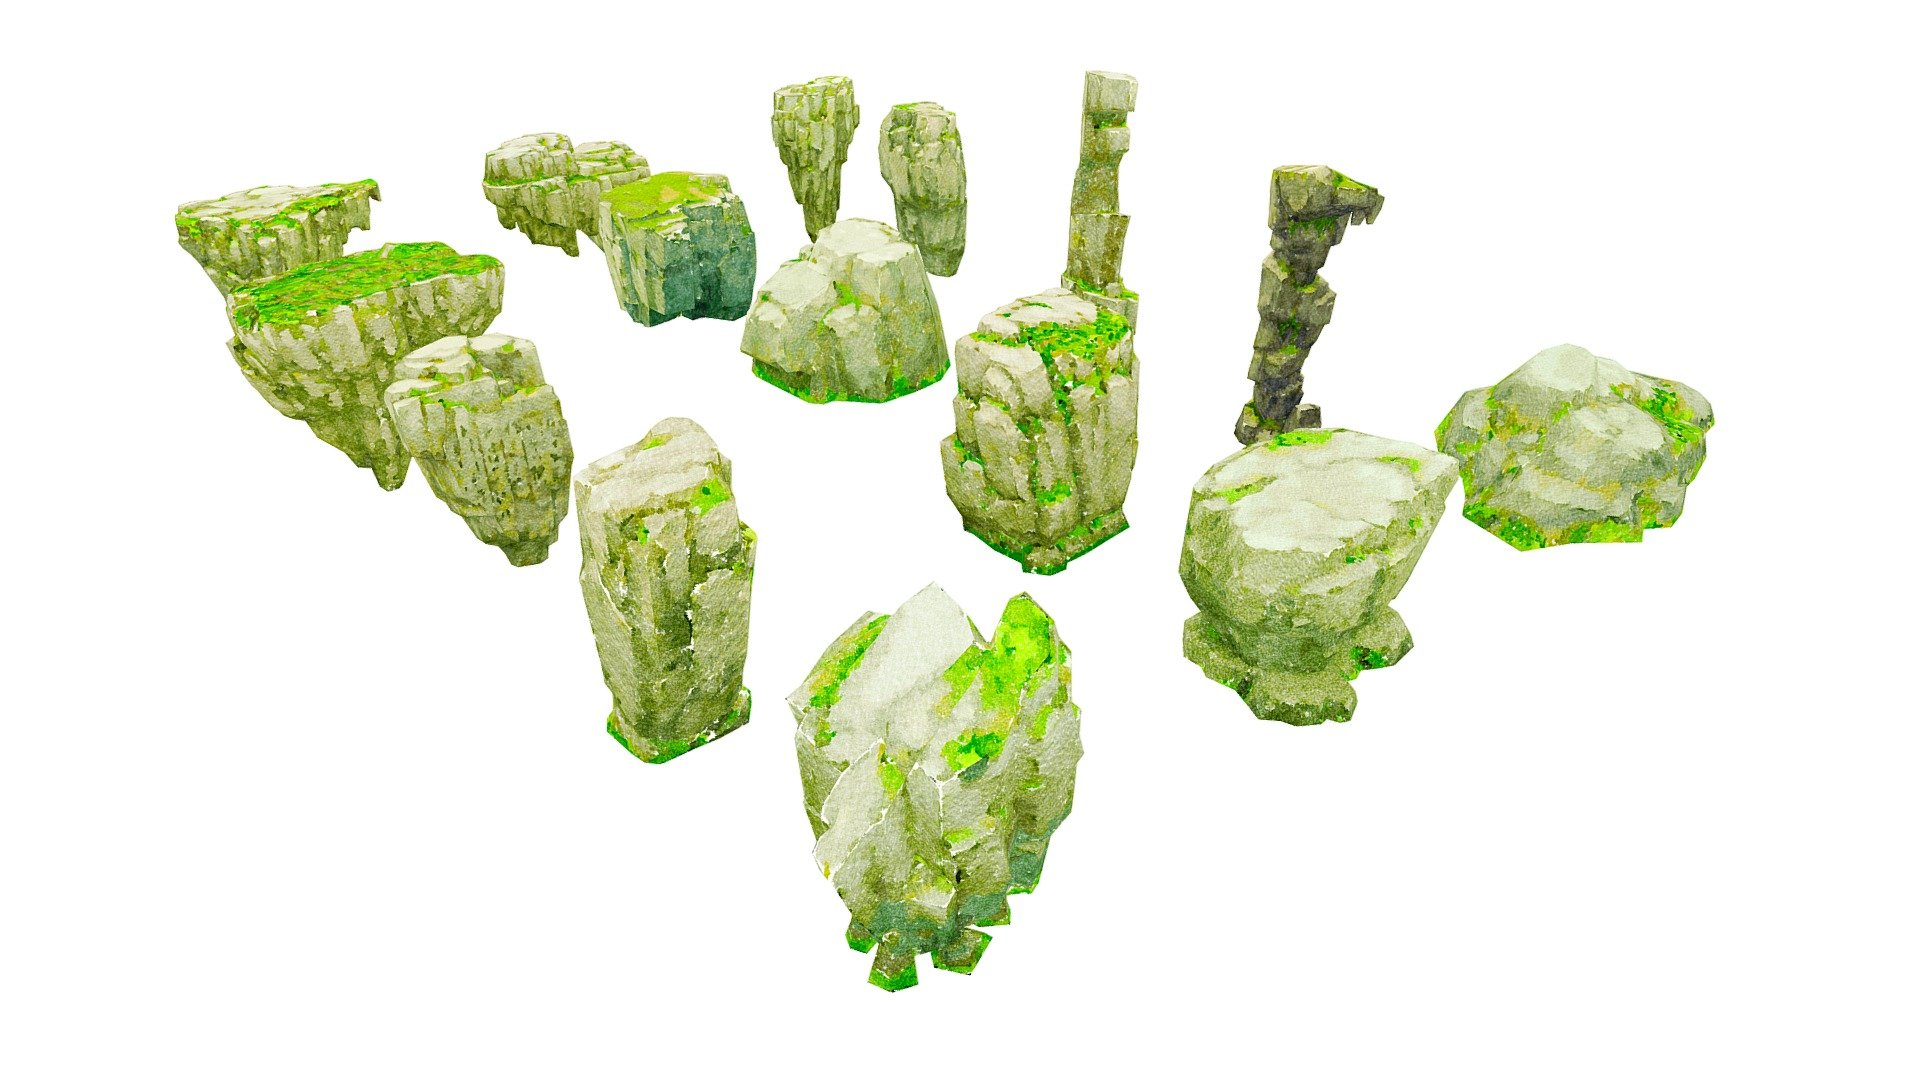 A package of low polygonal Rocks.The package contains 15 objects

Rock 1: 976 Poly, 885 Vert
Rock 2: 1393 Poly, 1009 Vert
Rock 3: 517 Poly, 431 Vert
Rock 4: 281 Poly, 245 Vert
Rock 5: 347 Poly, 311 Vert
Rock 6: 233 Poly, 204 Vert
Rock 7: 457 Poly, 378 Vert
Rock 8: 159 Poly, 142 Vert
Rock 9: 700 Poly, 502 Vert
Rock 10: 1285 Poly, 1044 Vert
Rock 11: 102 Poly, 101 Vert
Rock 12: 719 Poly, 414 Vert
Rock 13: 331 Poly, 202 Vert
Rock 14: 440 Poly, 323 Vert
Rock 15: 609 Poly, 545 Vert




Only Textures Diffus duplicated in resolution 1024 x 512. Format textures of PNG. Files include: 3Dsmax, 3Ds, Obj, Fbx and folder with textures. Ready import to game project (Unity, Unreal)
If there is a need for any type of model, send a message! We will provide. 
Thanks for your interest and love! 



Note: Watercolor style illustrations 
It is recommended to use flat lighting or shaderless material - Rock Illustration Collection Part 3 - 3D model by josluat91 3d model